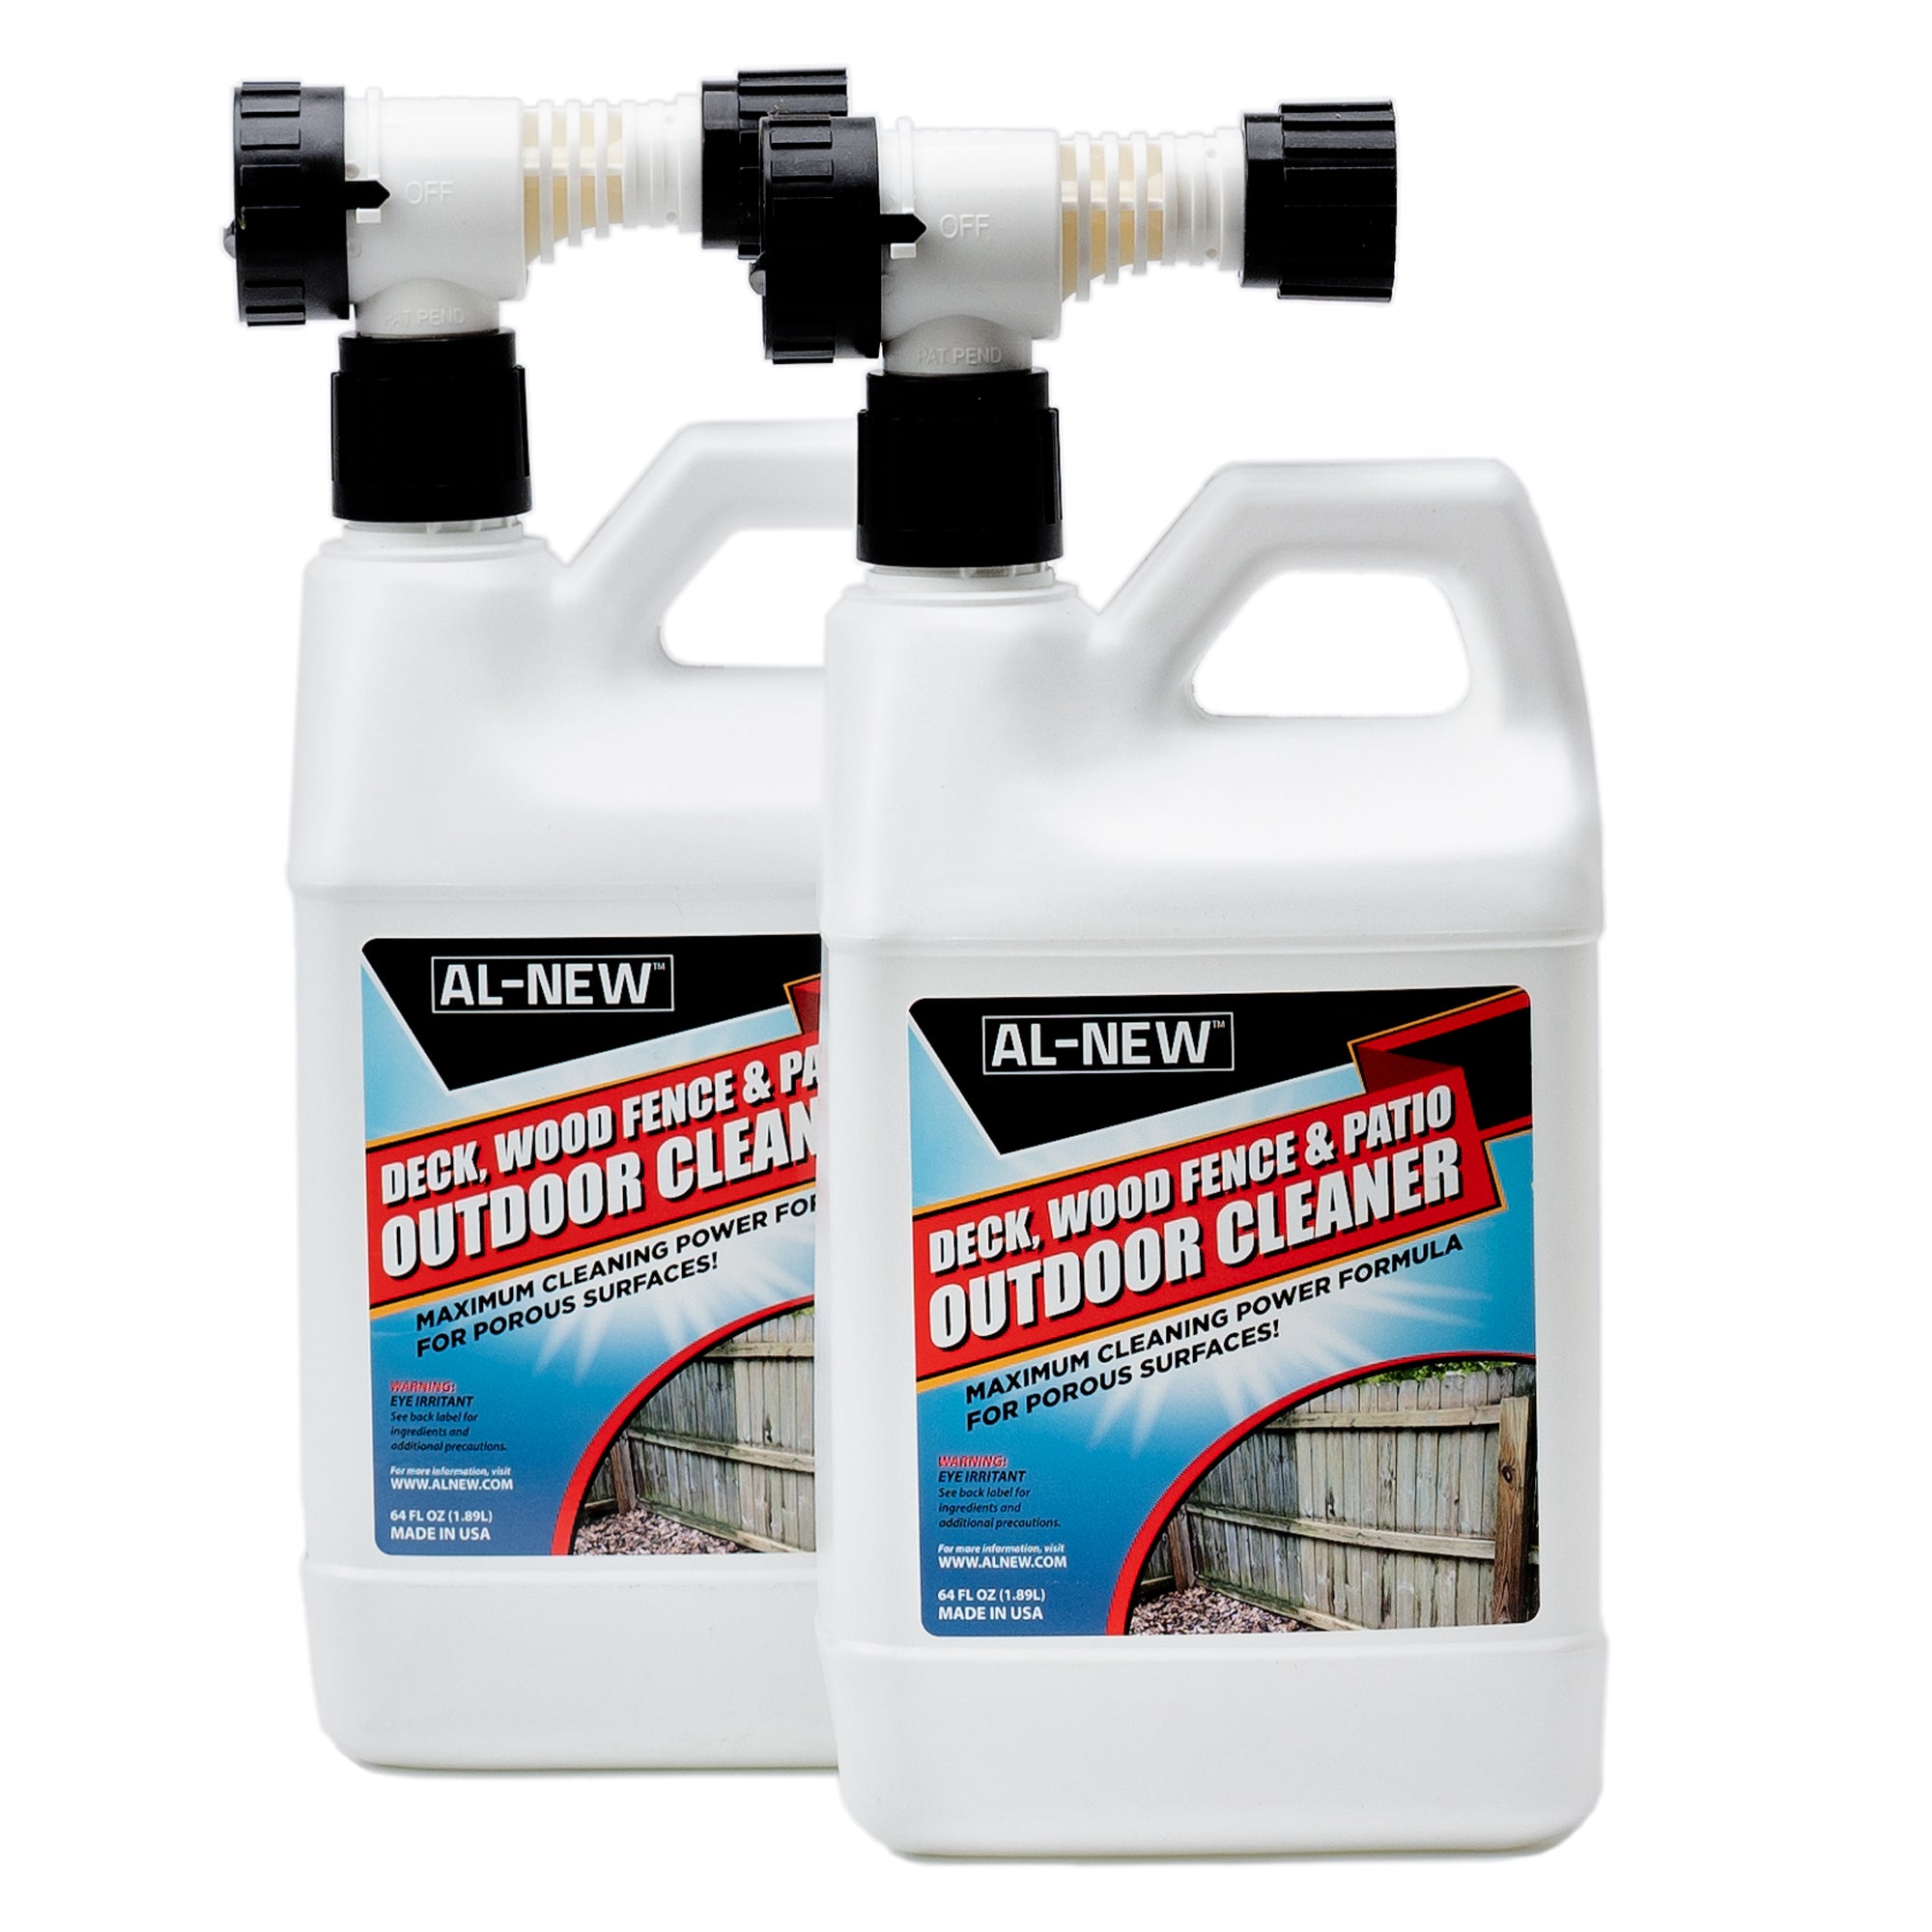 Cleaning Fences - A Guide to Cleaning Vinyl, Aluminum, Steel & Stone